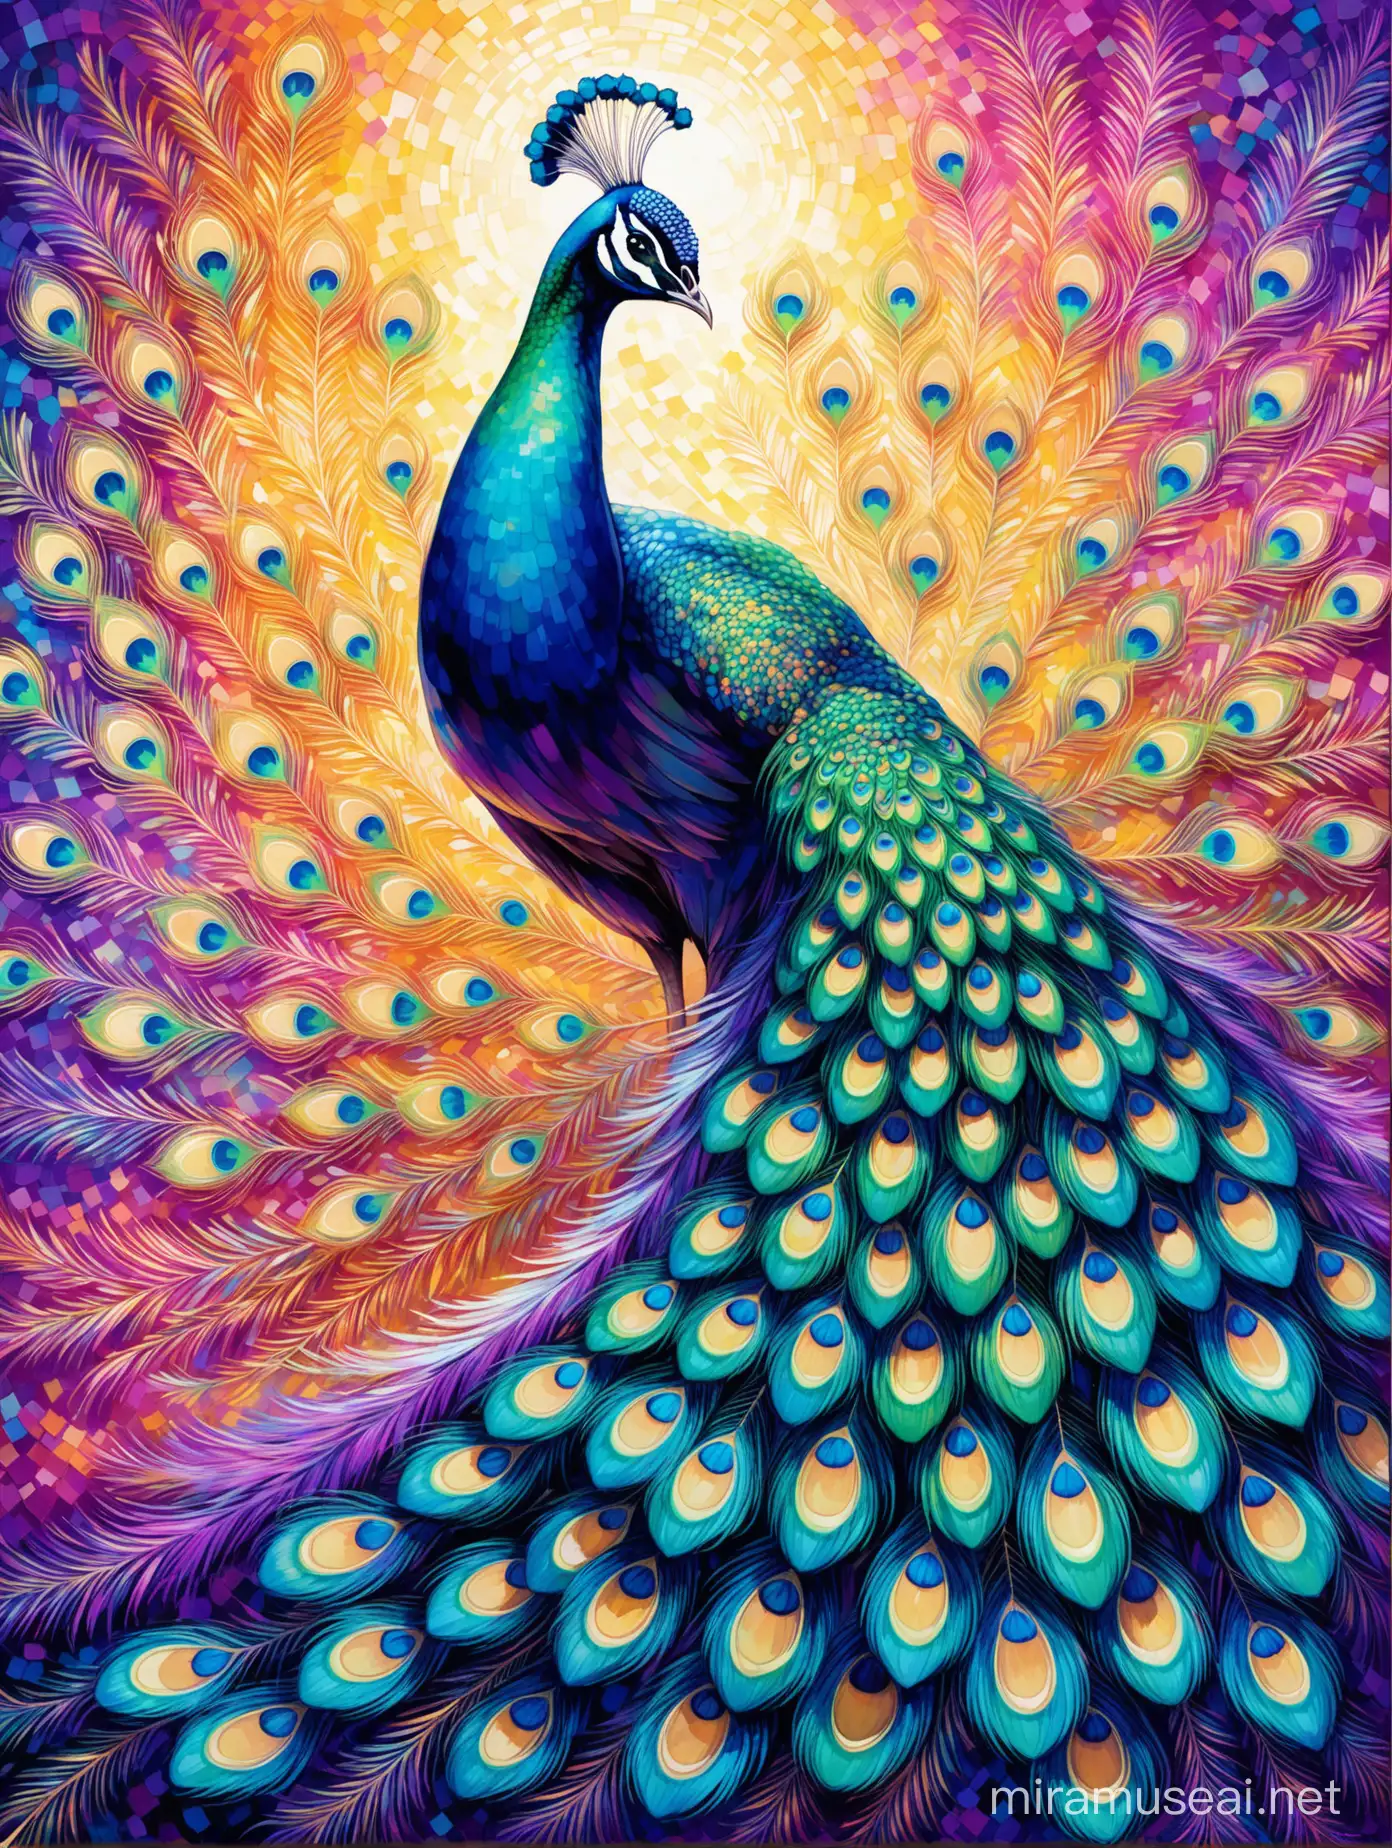 Vibrant Abstract Peacock Painting Capturing Beauty and Grace